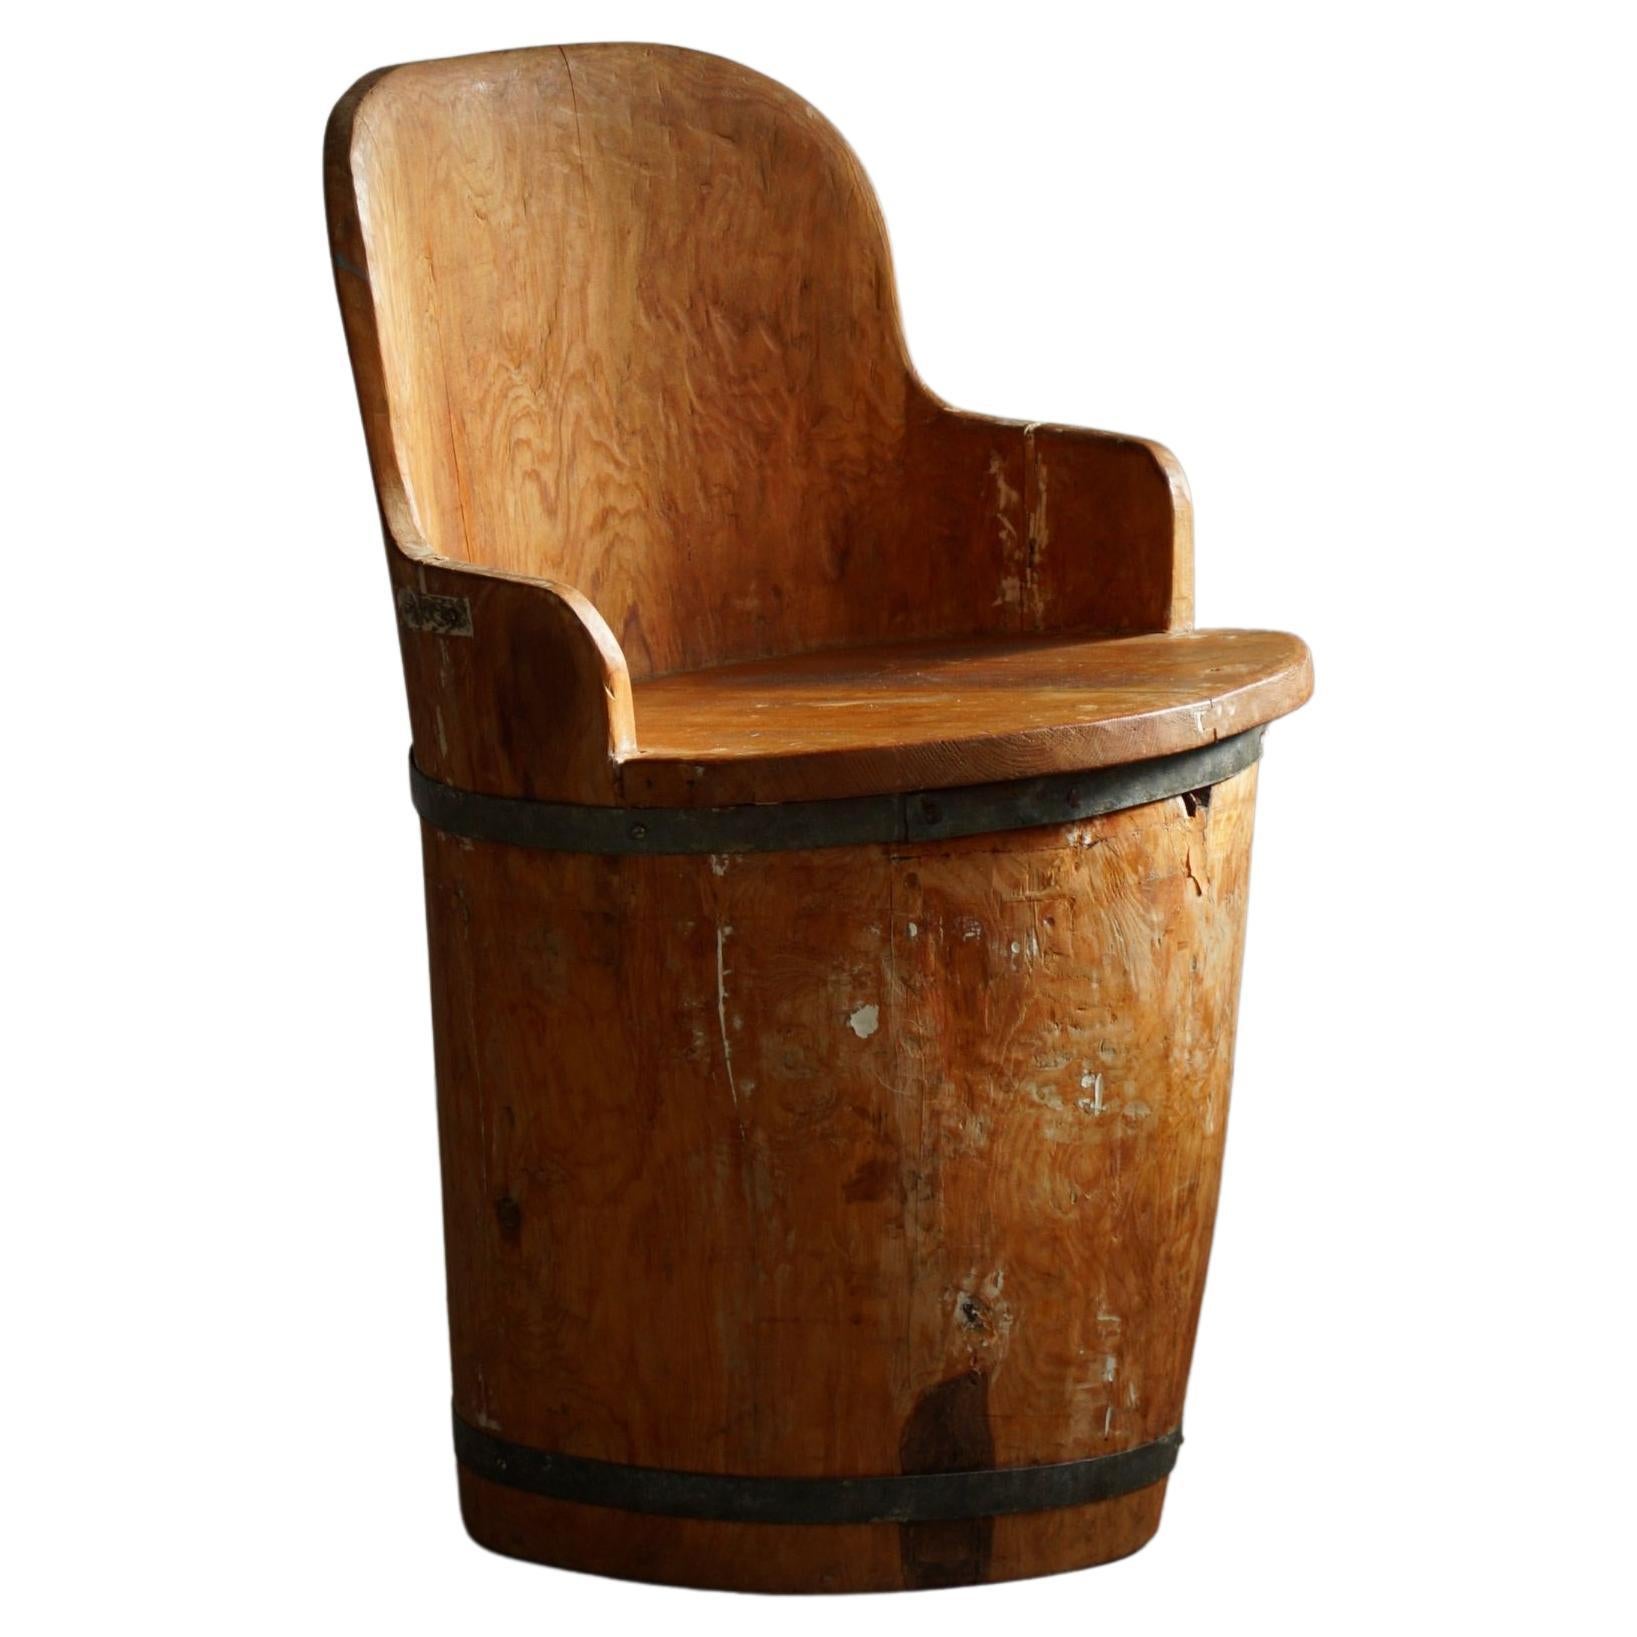 Mid 20th Century Wabi Sabi Stump Chair in Pine, by a Swedish Cabinetmaker, 1950s For Sale